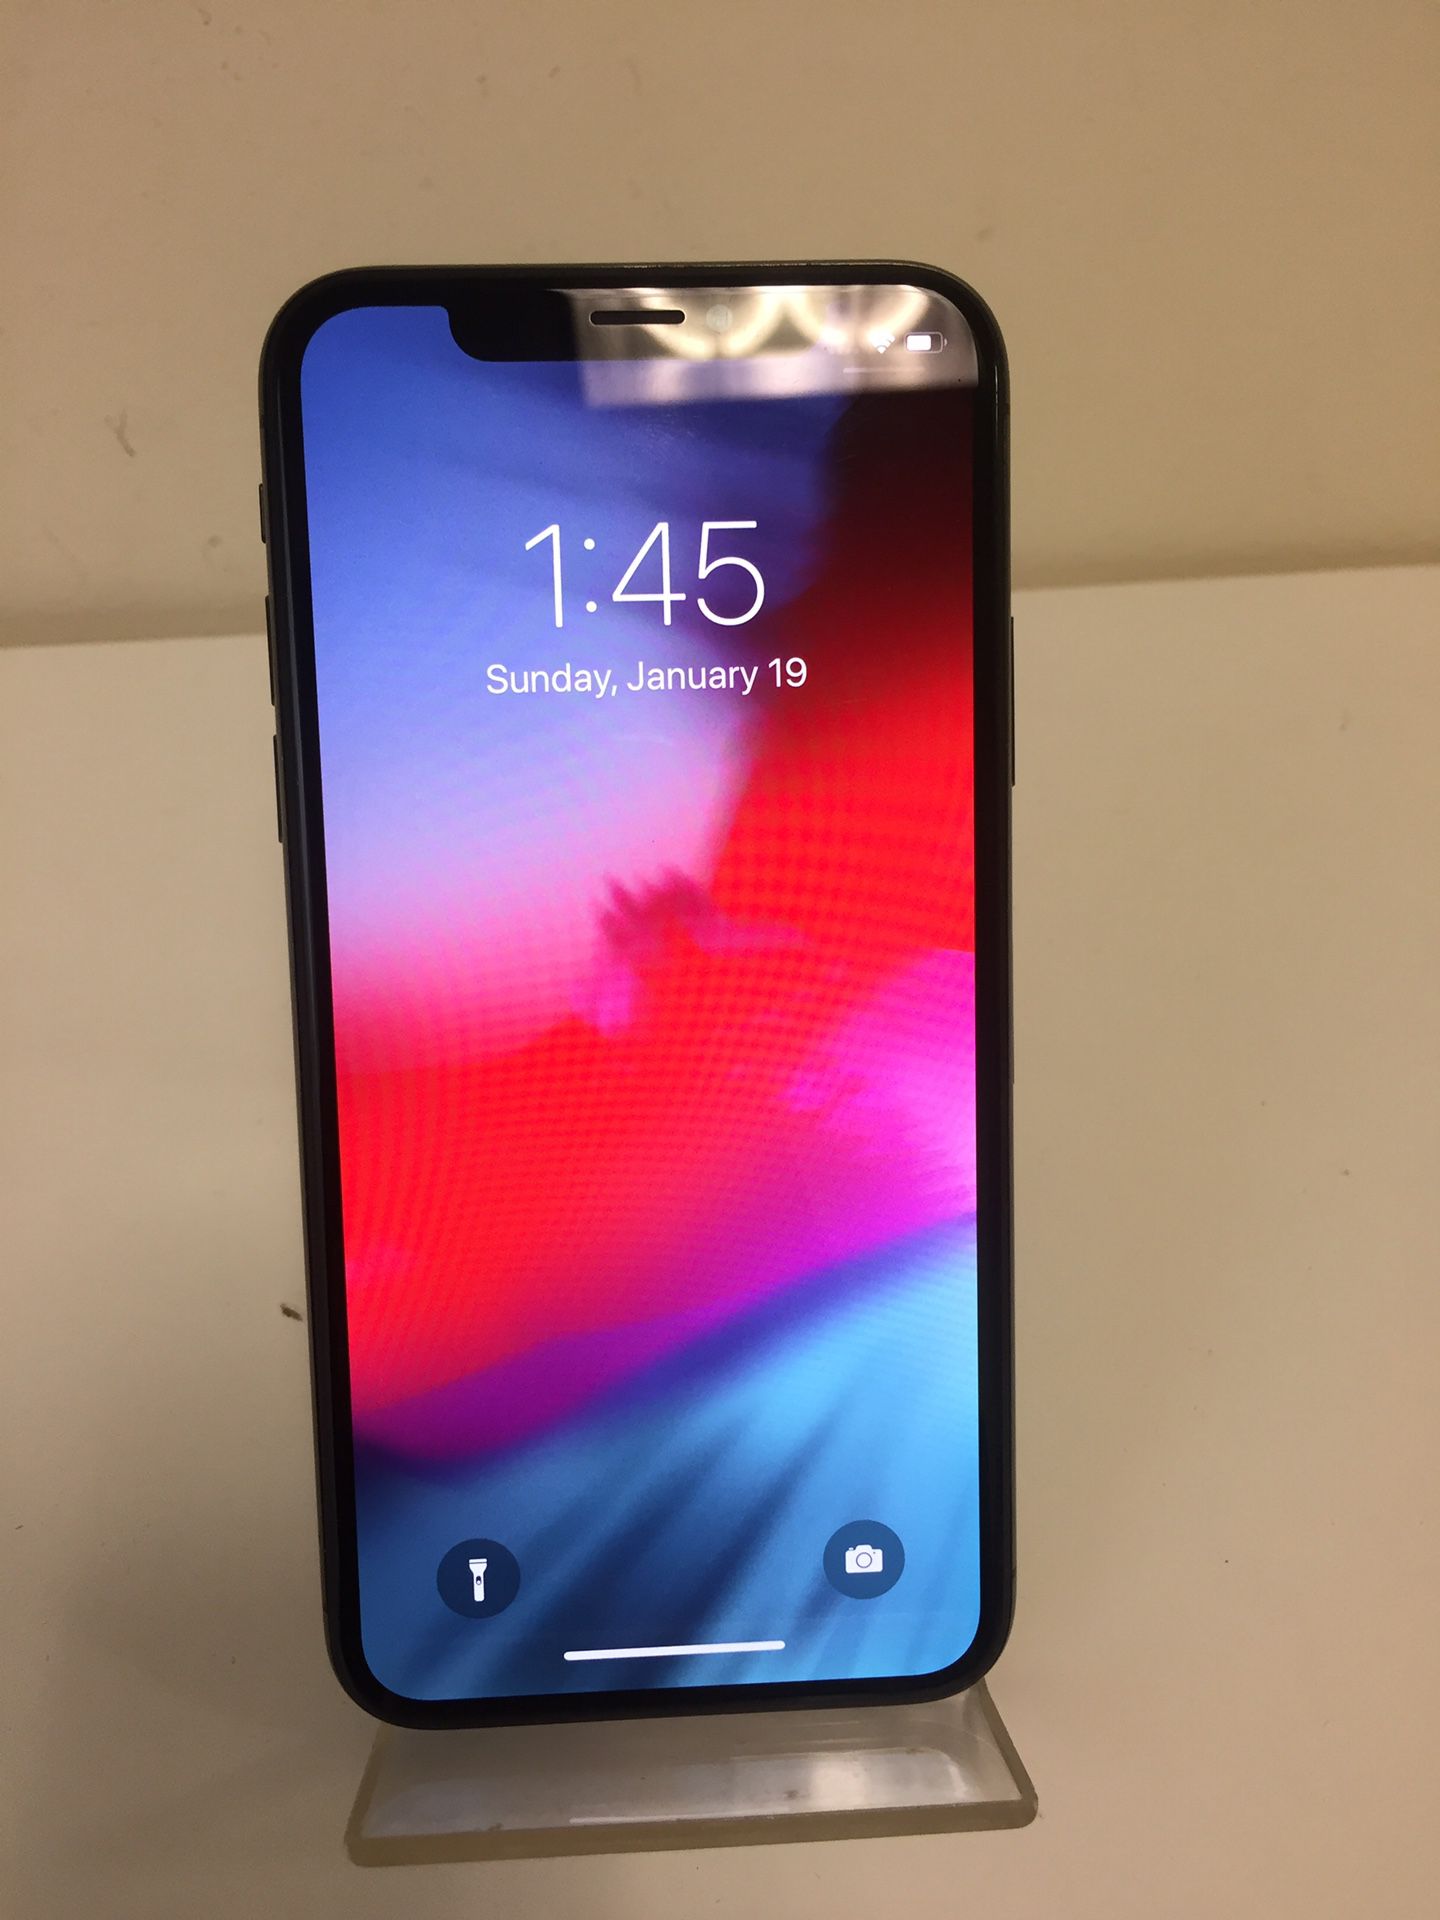 iPhone X (Sprint)(256gb) - *Excellent like new condition